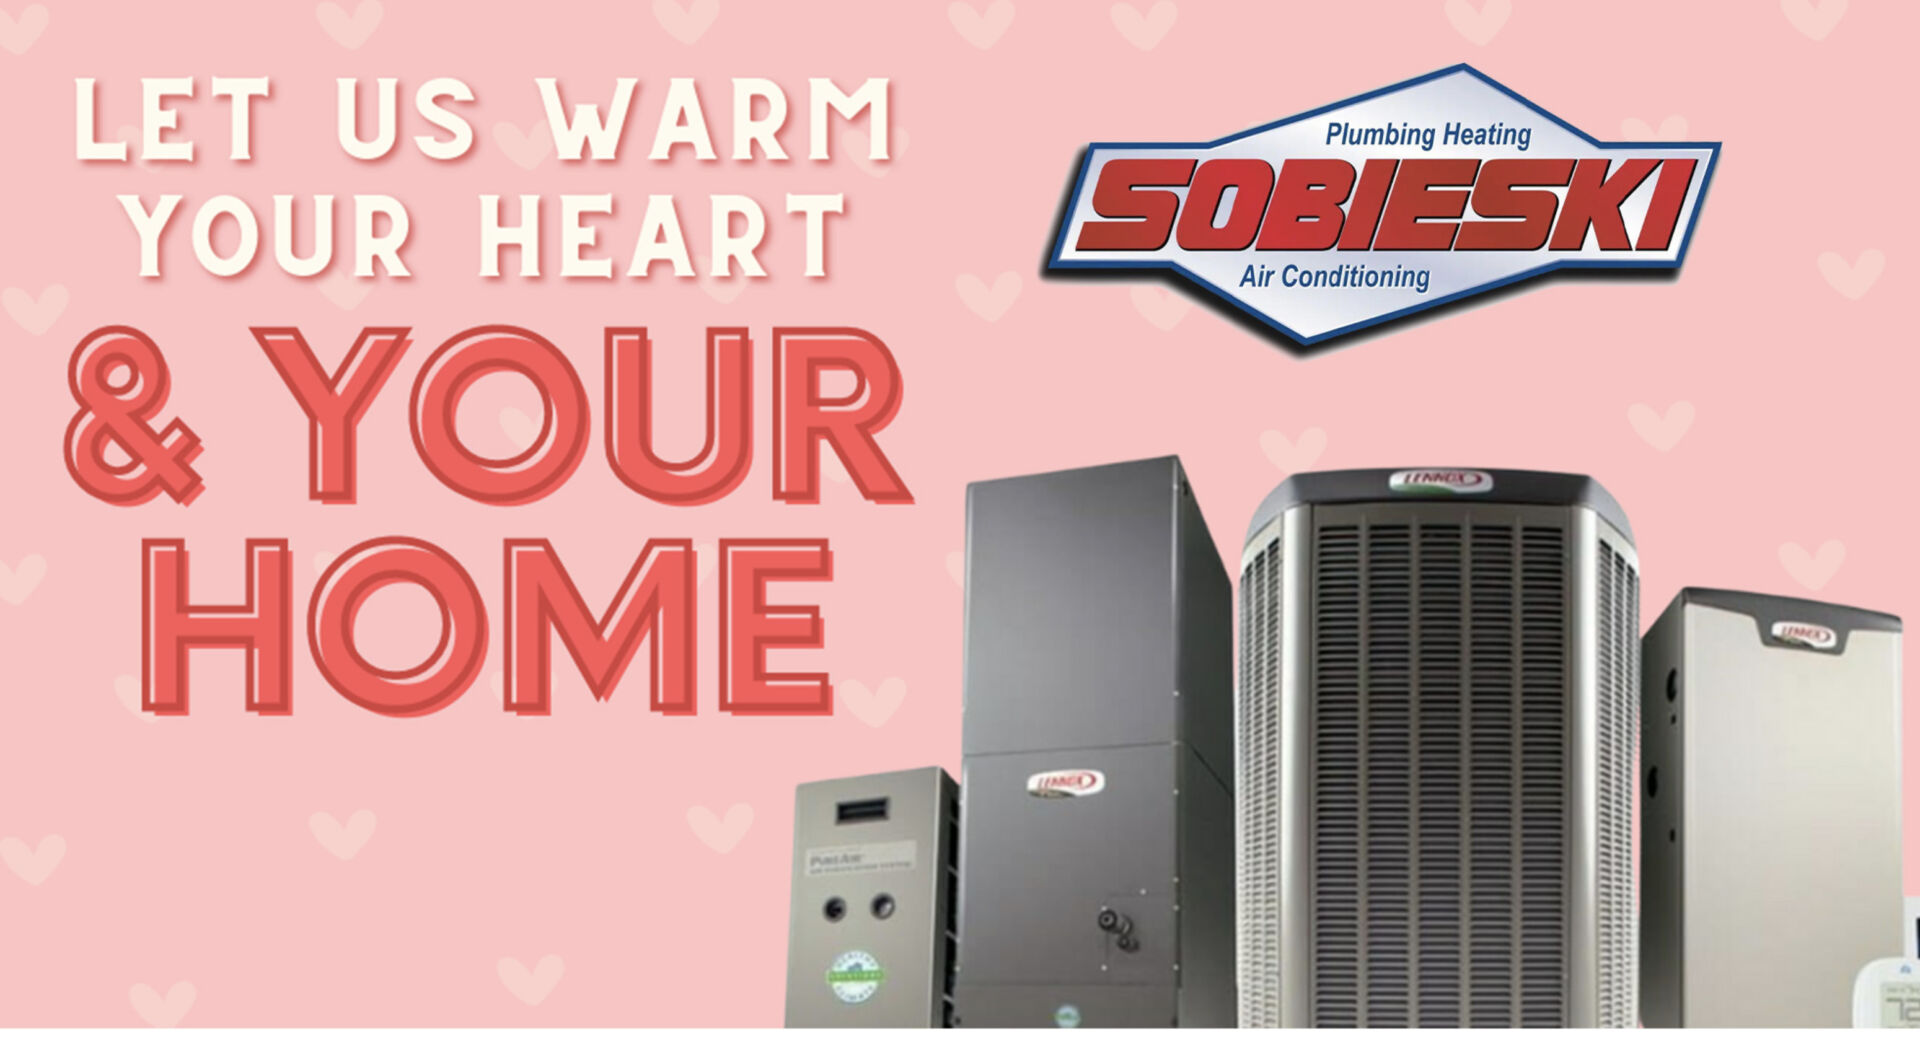 Let Us Warm Your Heart and Your Home